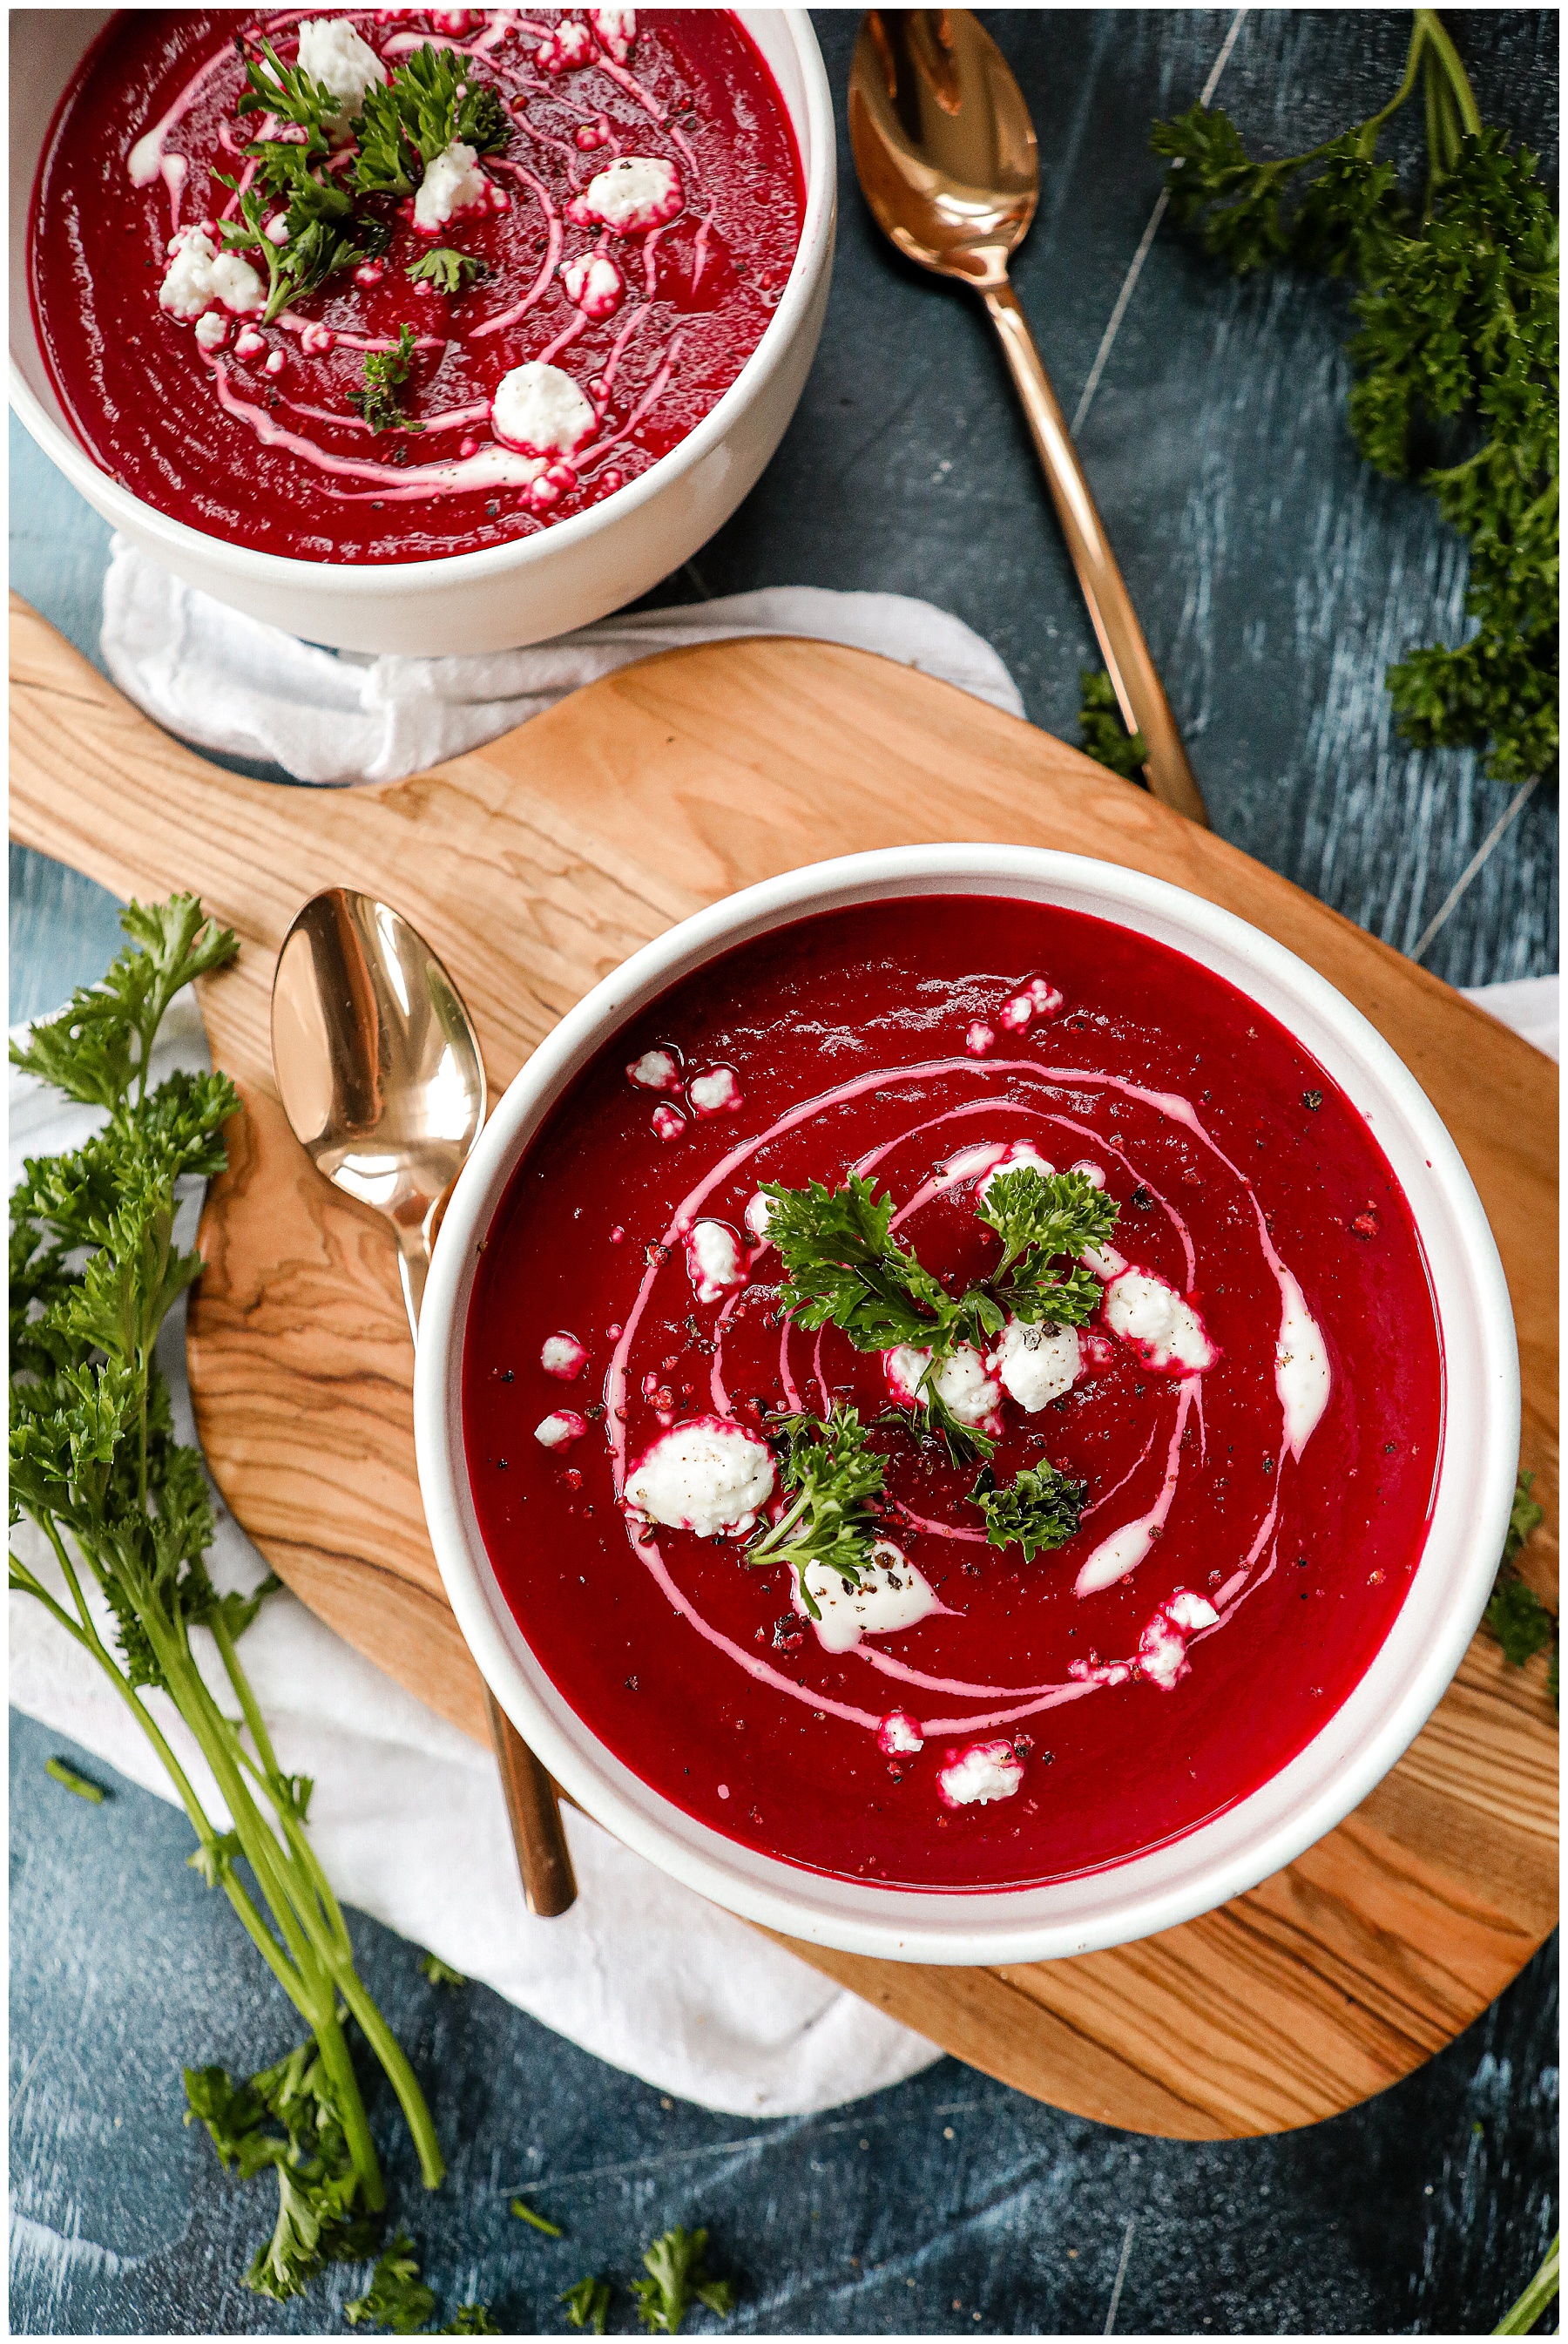 Recipe for beet soup